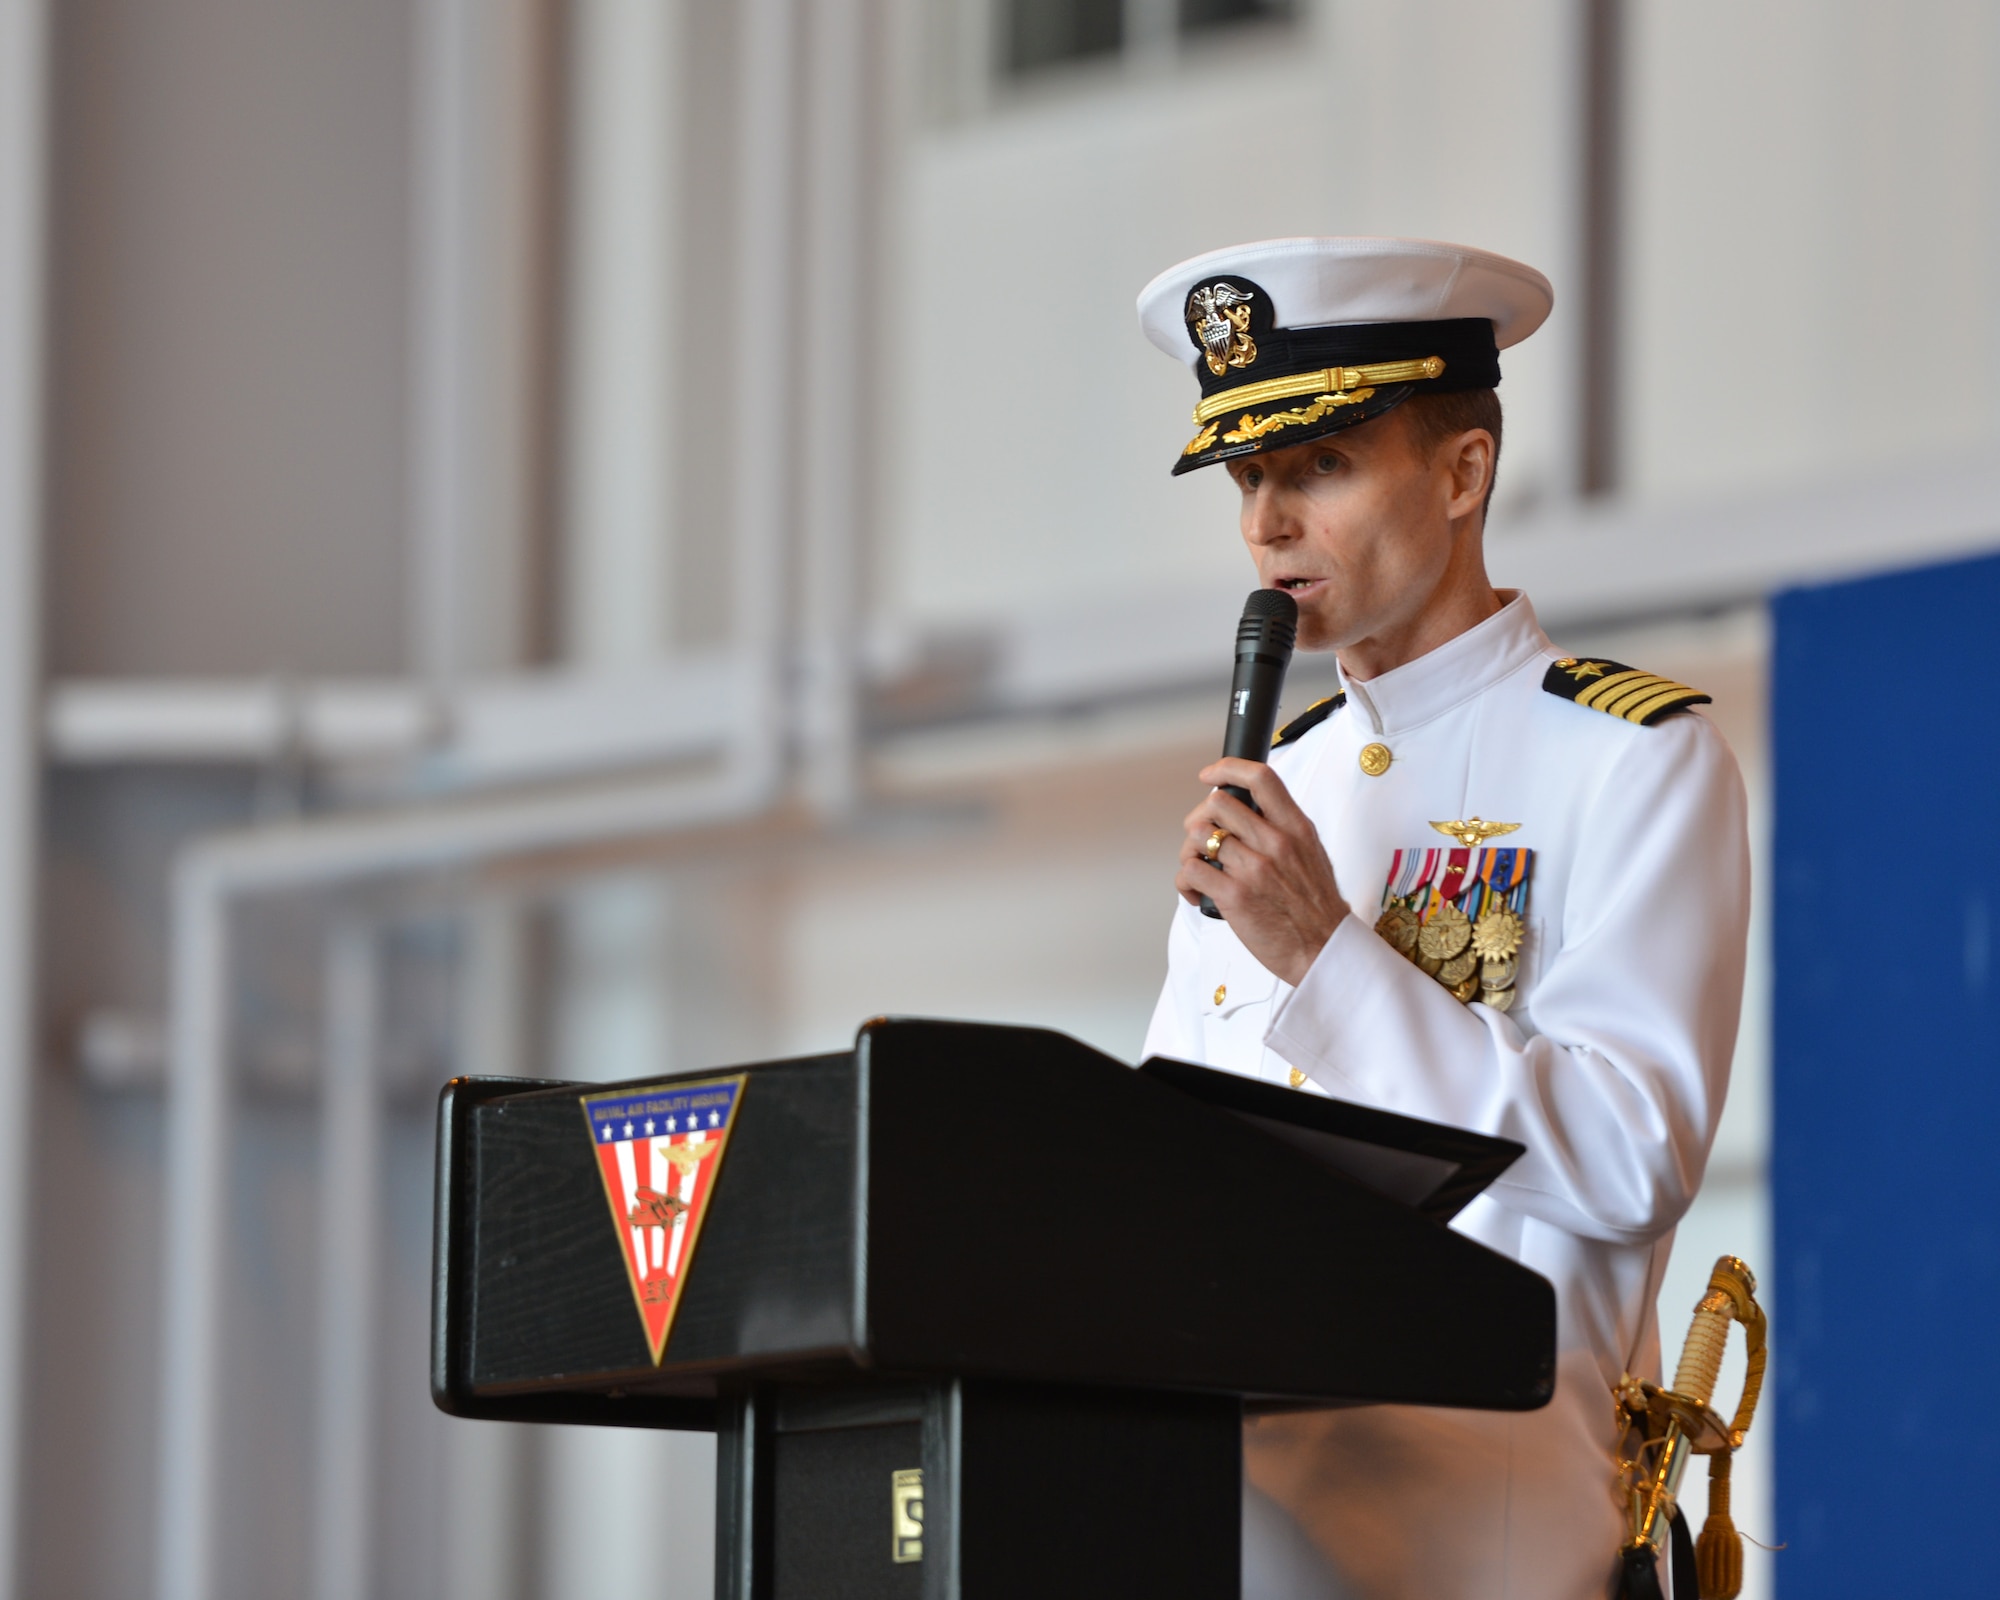 Capt. Keith Henry, originally from Cheshire, Connecticut, addresses the audience after taking command of Naval Air Facility (NAF) Misawa during a change of command ceremony, June 20, 0214.  Henry assumed command of NAF Misawa from Capt. Chris Rodeman, becoming the 18th commanding officer in the installation’s history. NAF Misawa is a U.S. naval base located in northern Japan. (U.S. Navy photo by Mass Communication Specialist 3rd Class Erin Devenberg/Released)